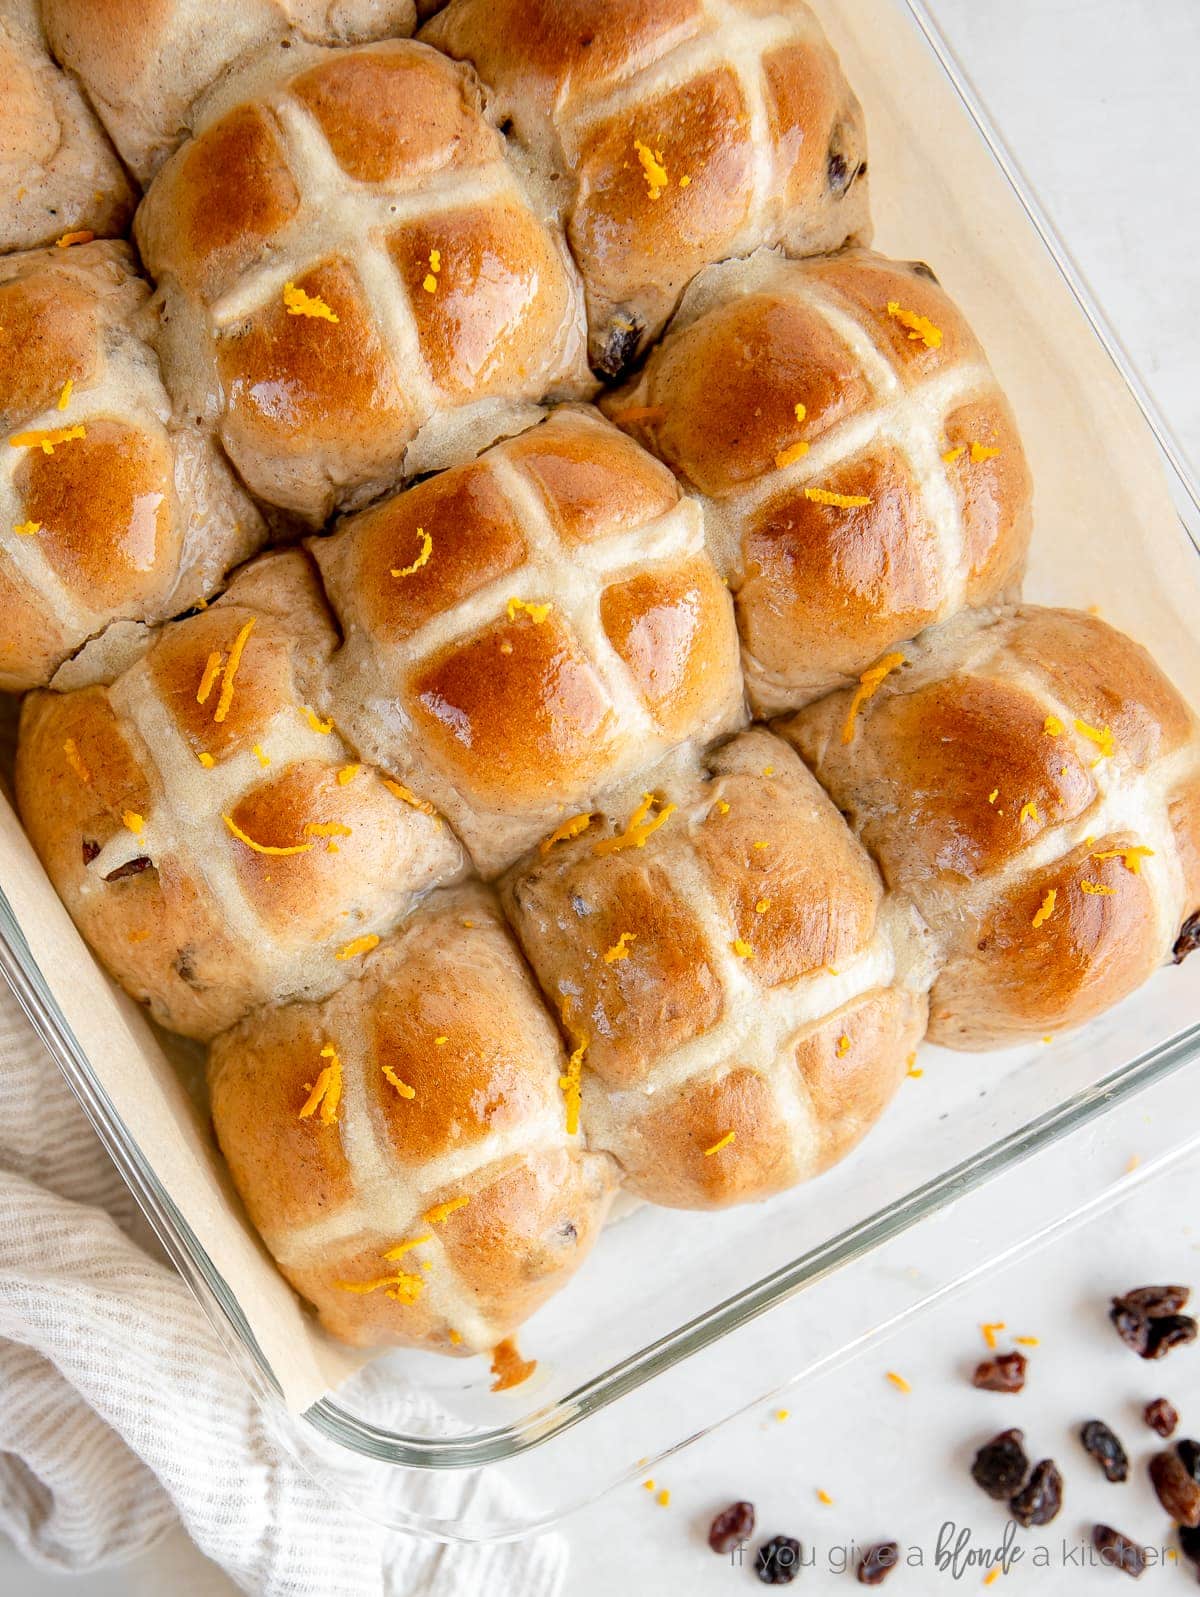 hot cross buns with orange zest in a glass baking dish